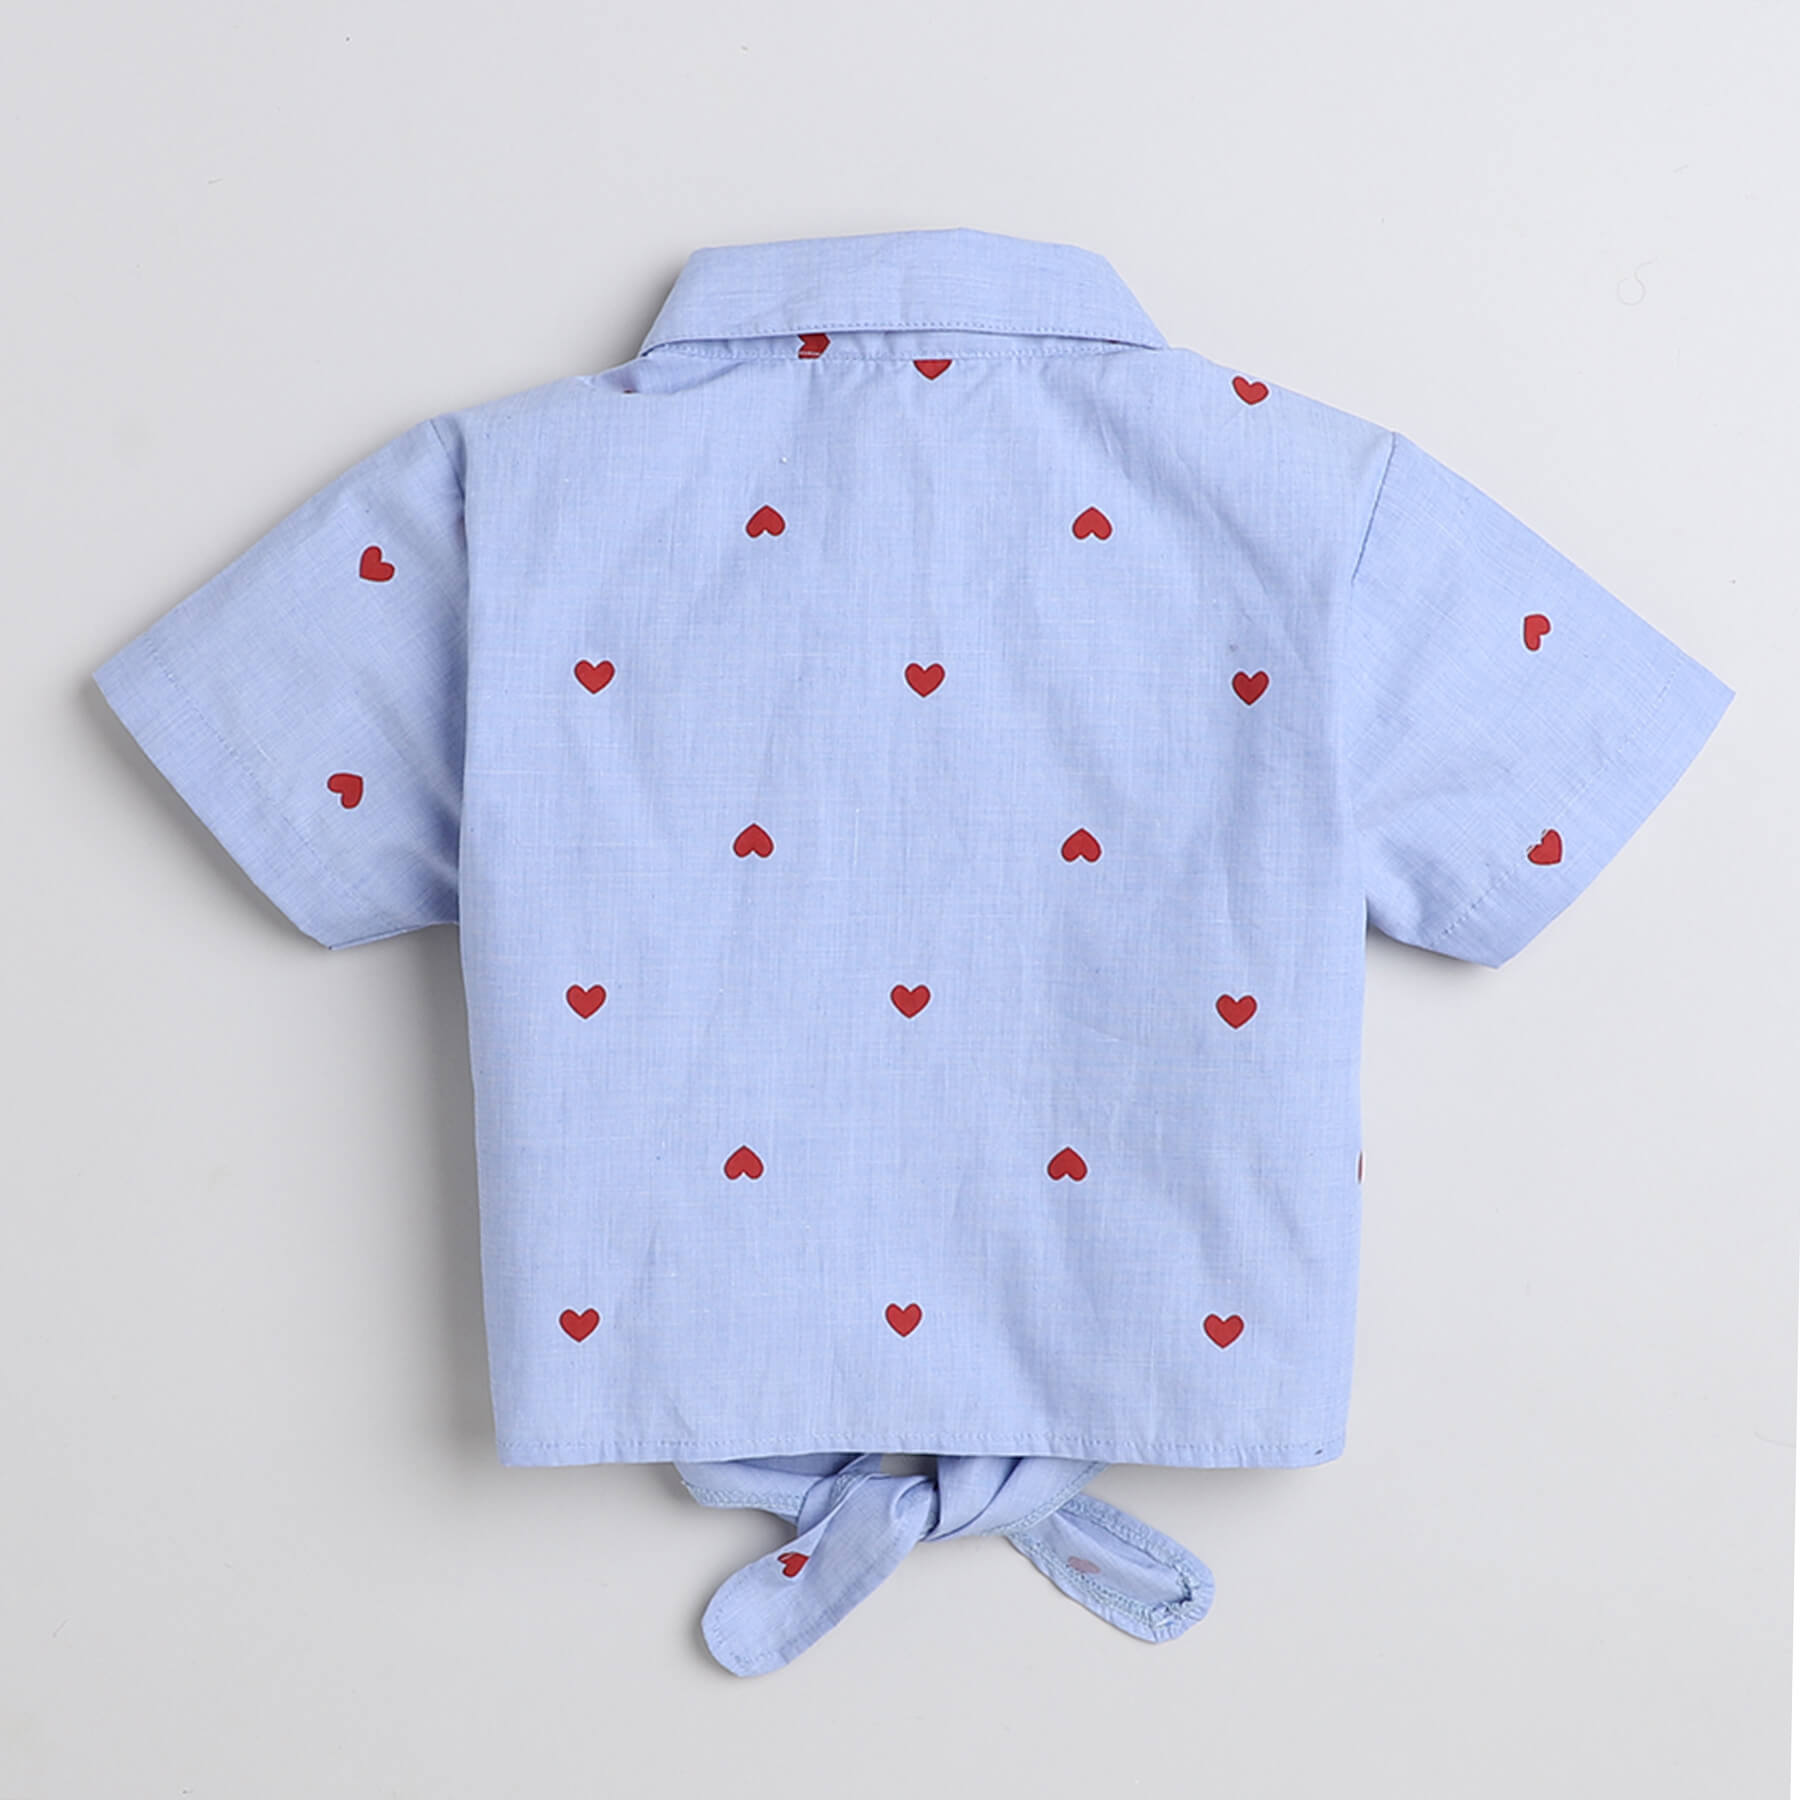 Taffykids 100% cotton Heart printed half sleeves front tie-up button up crop shirt-Blue/Red